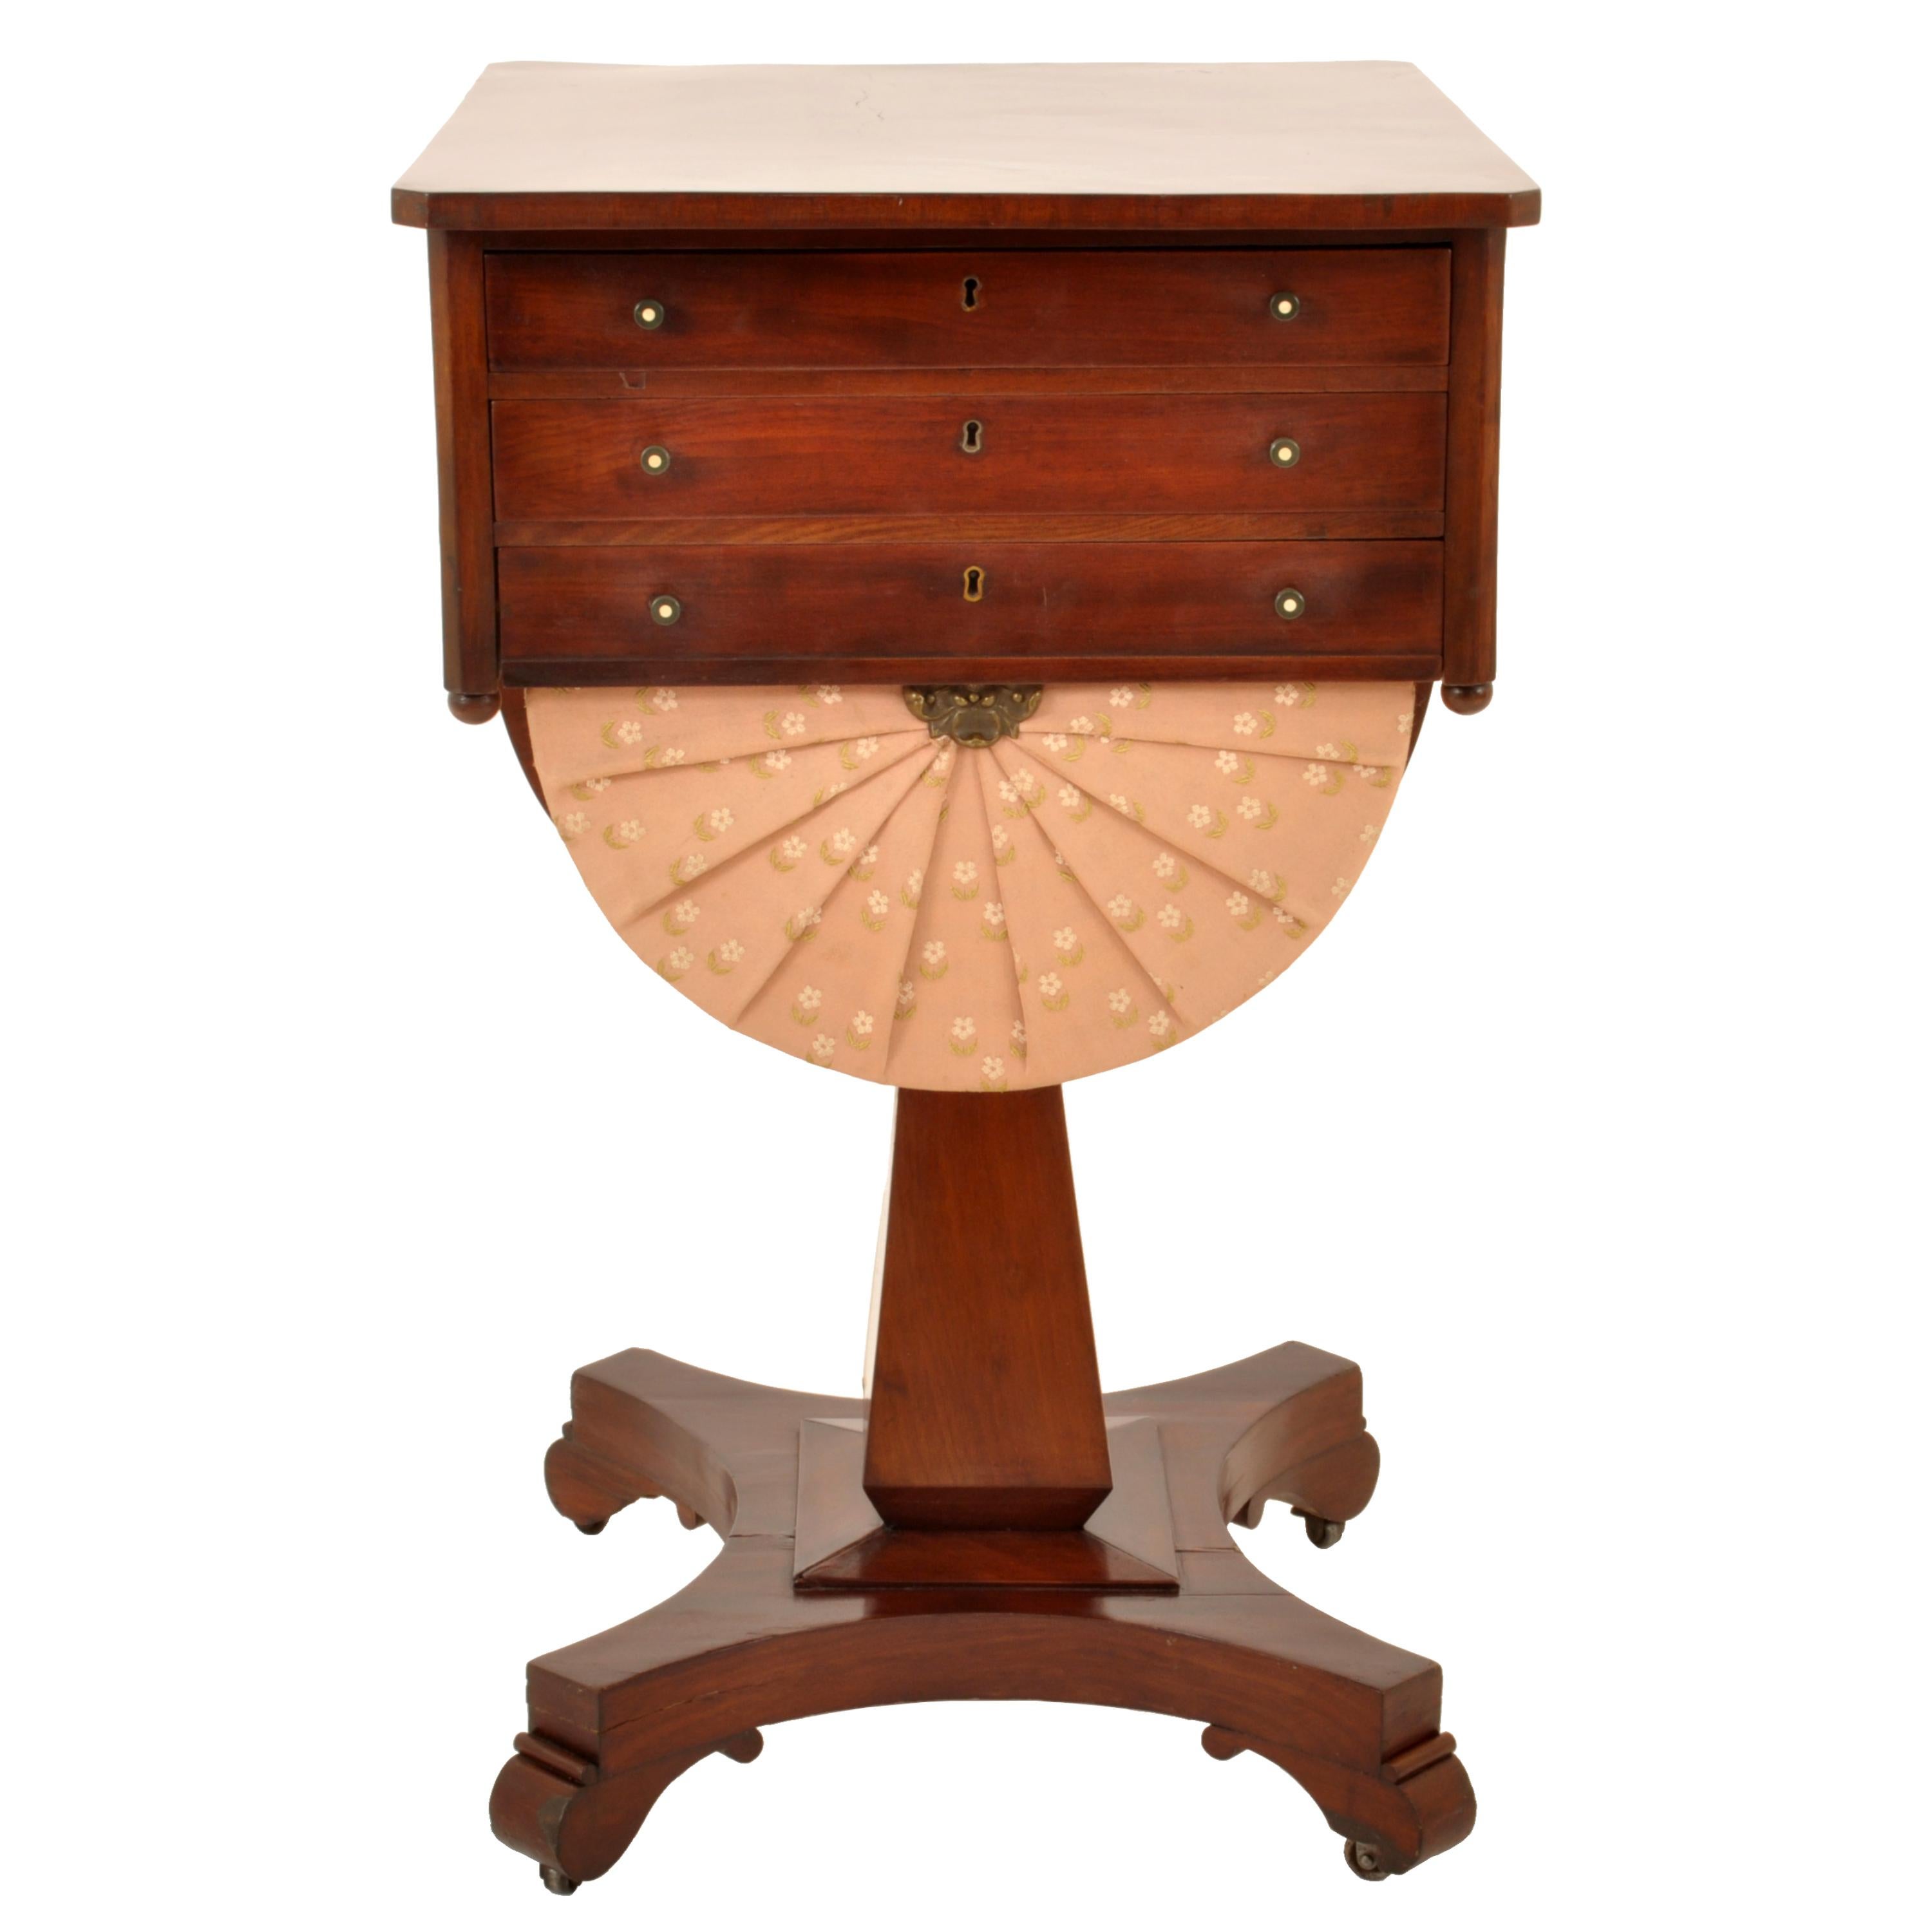 Antique American Empire Mahogany Pedestal Sewing Work Table New York Circa 1840 For Sale 2